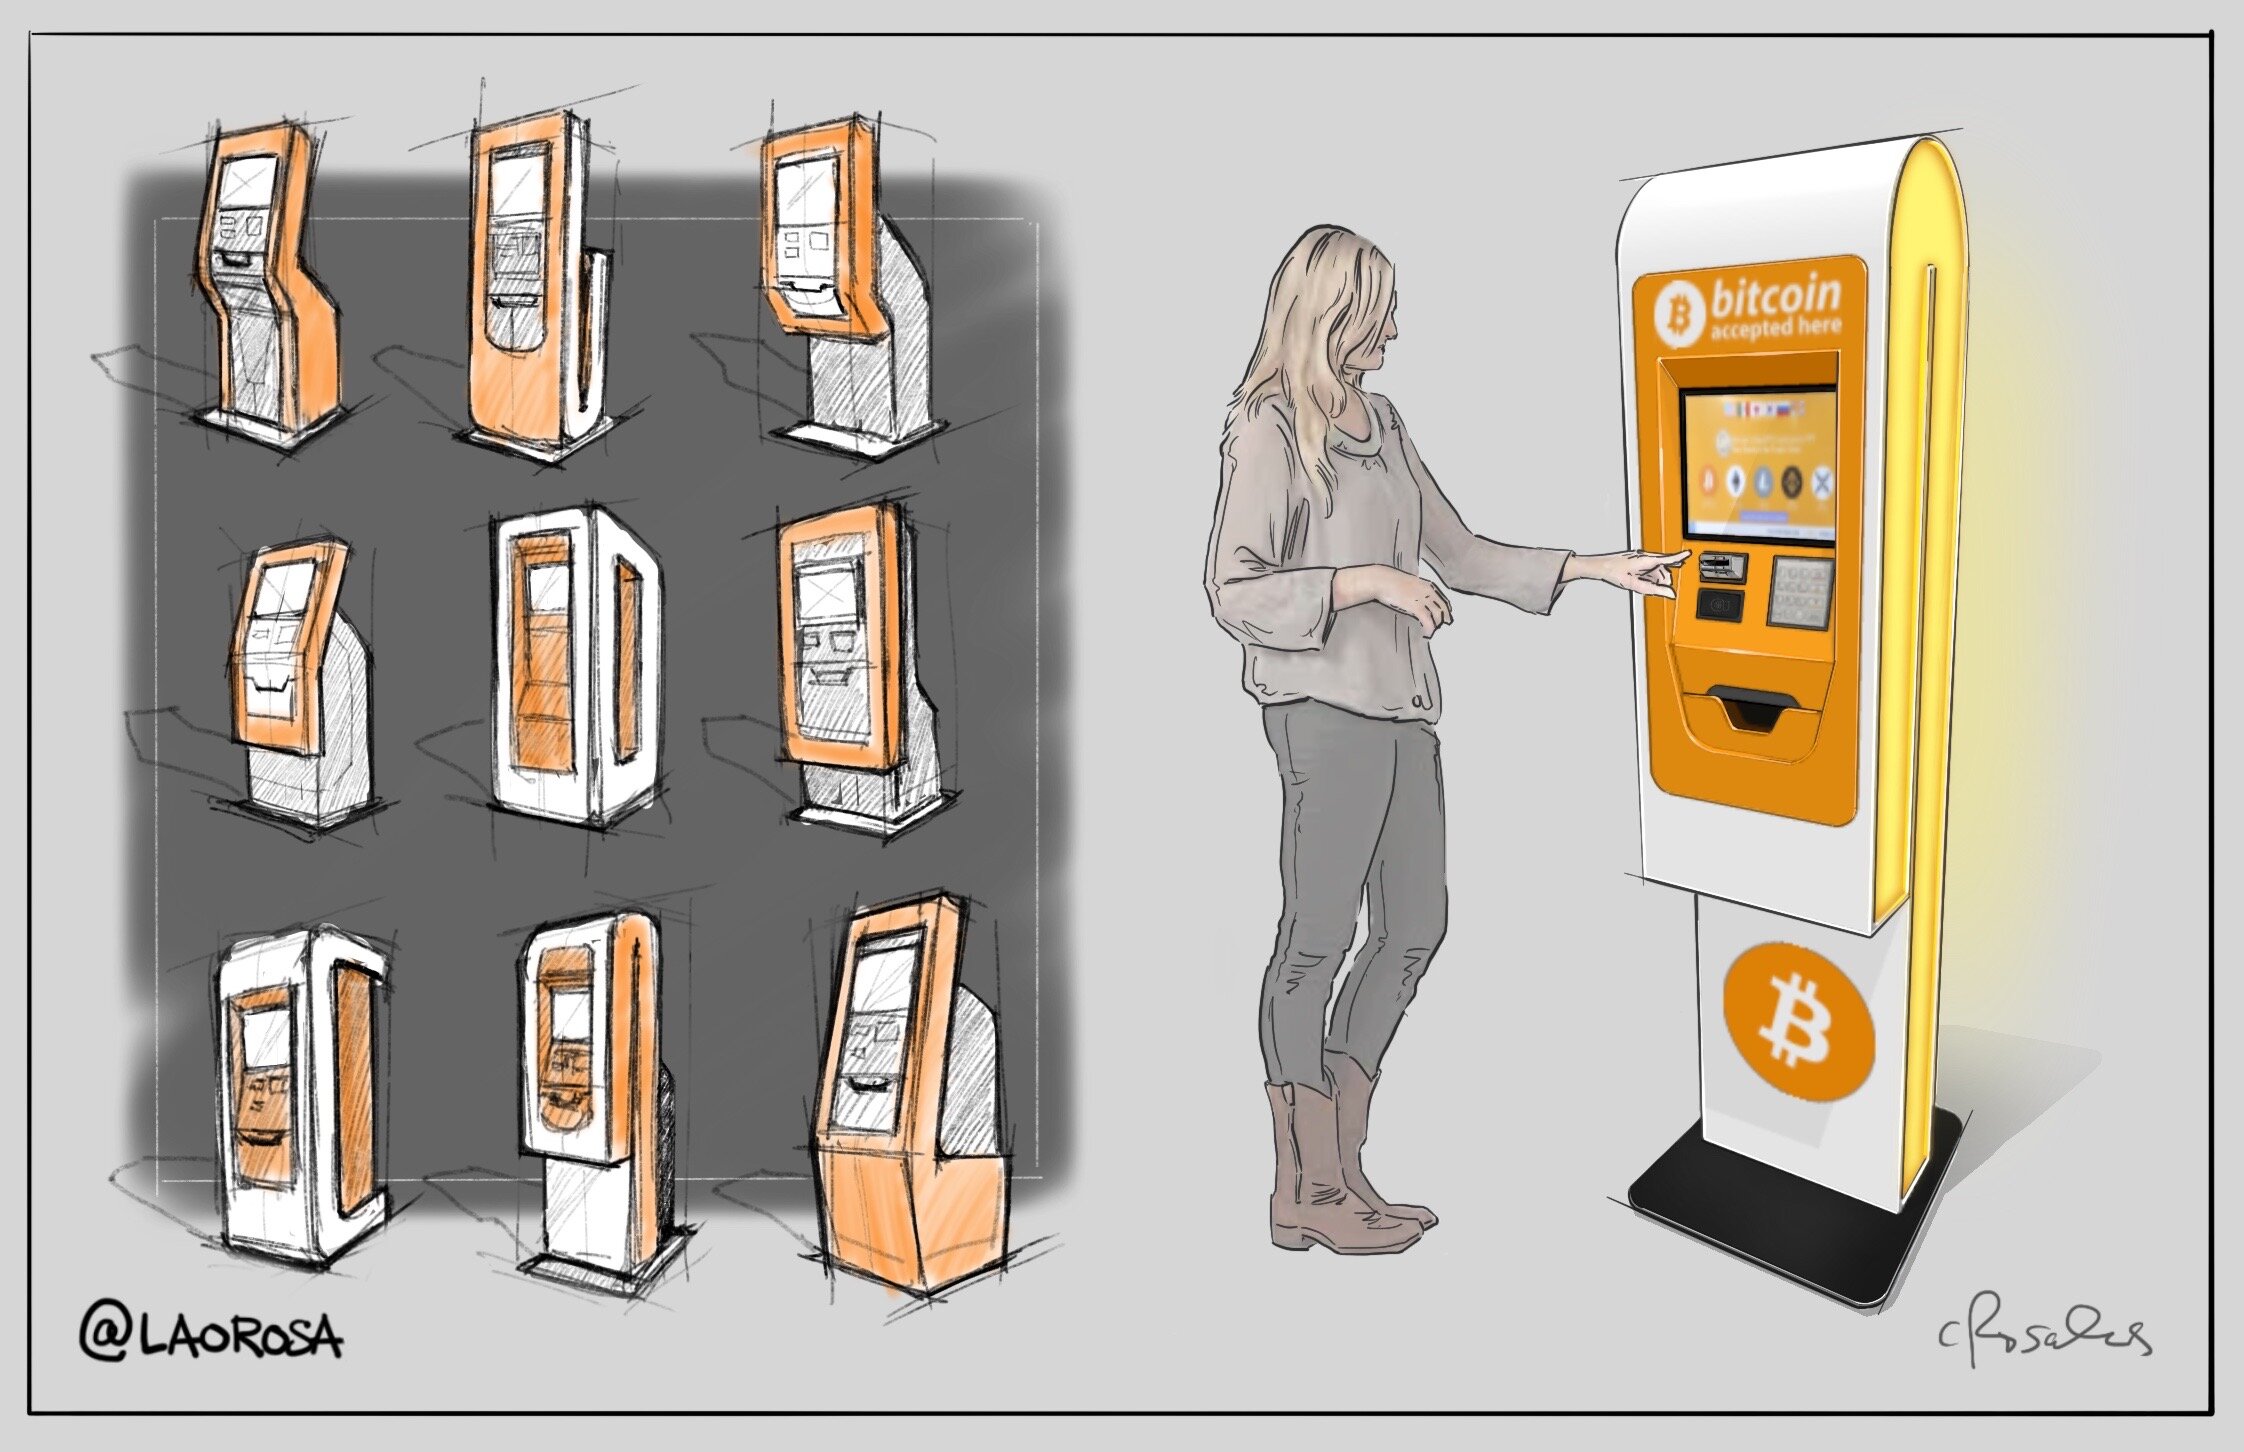  Conceptual ideation of a  Bitcoin  cryptocurrency ATM.  